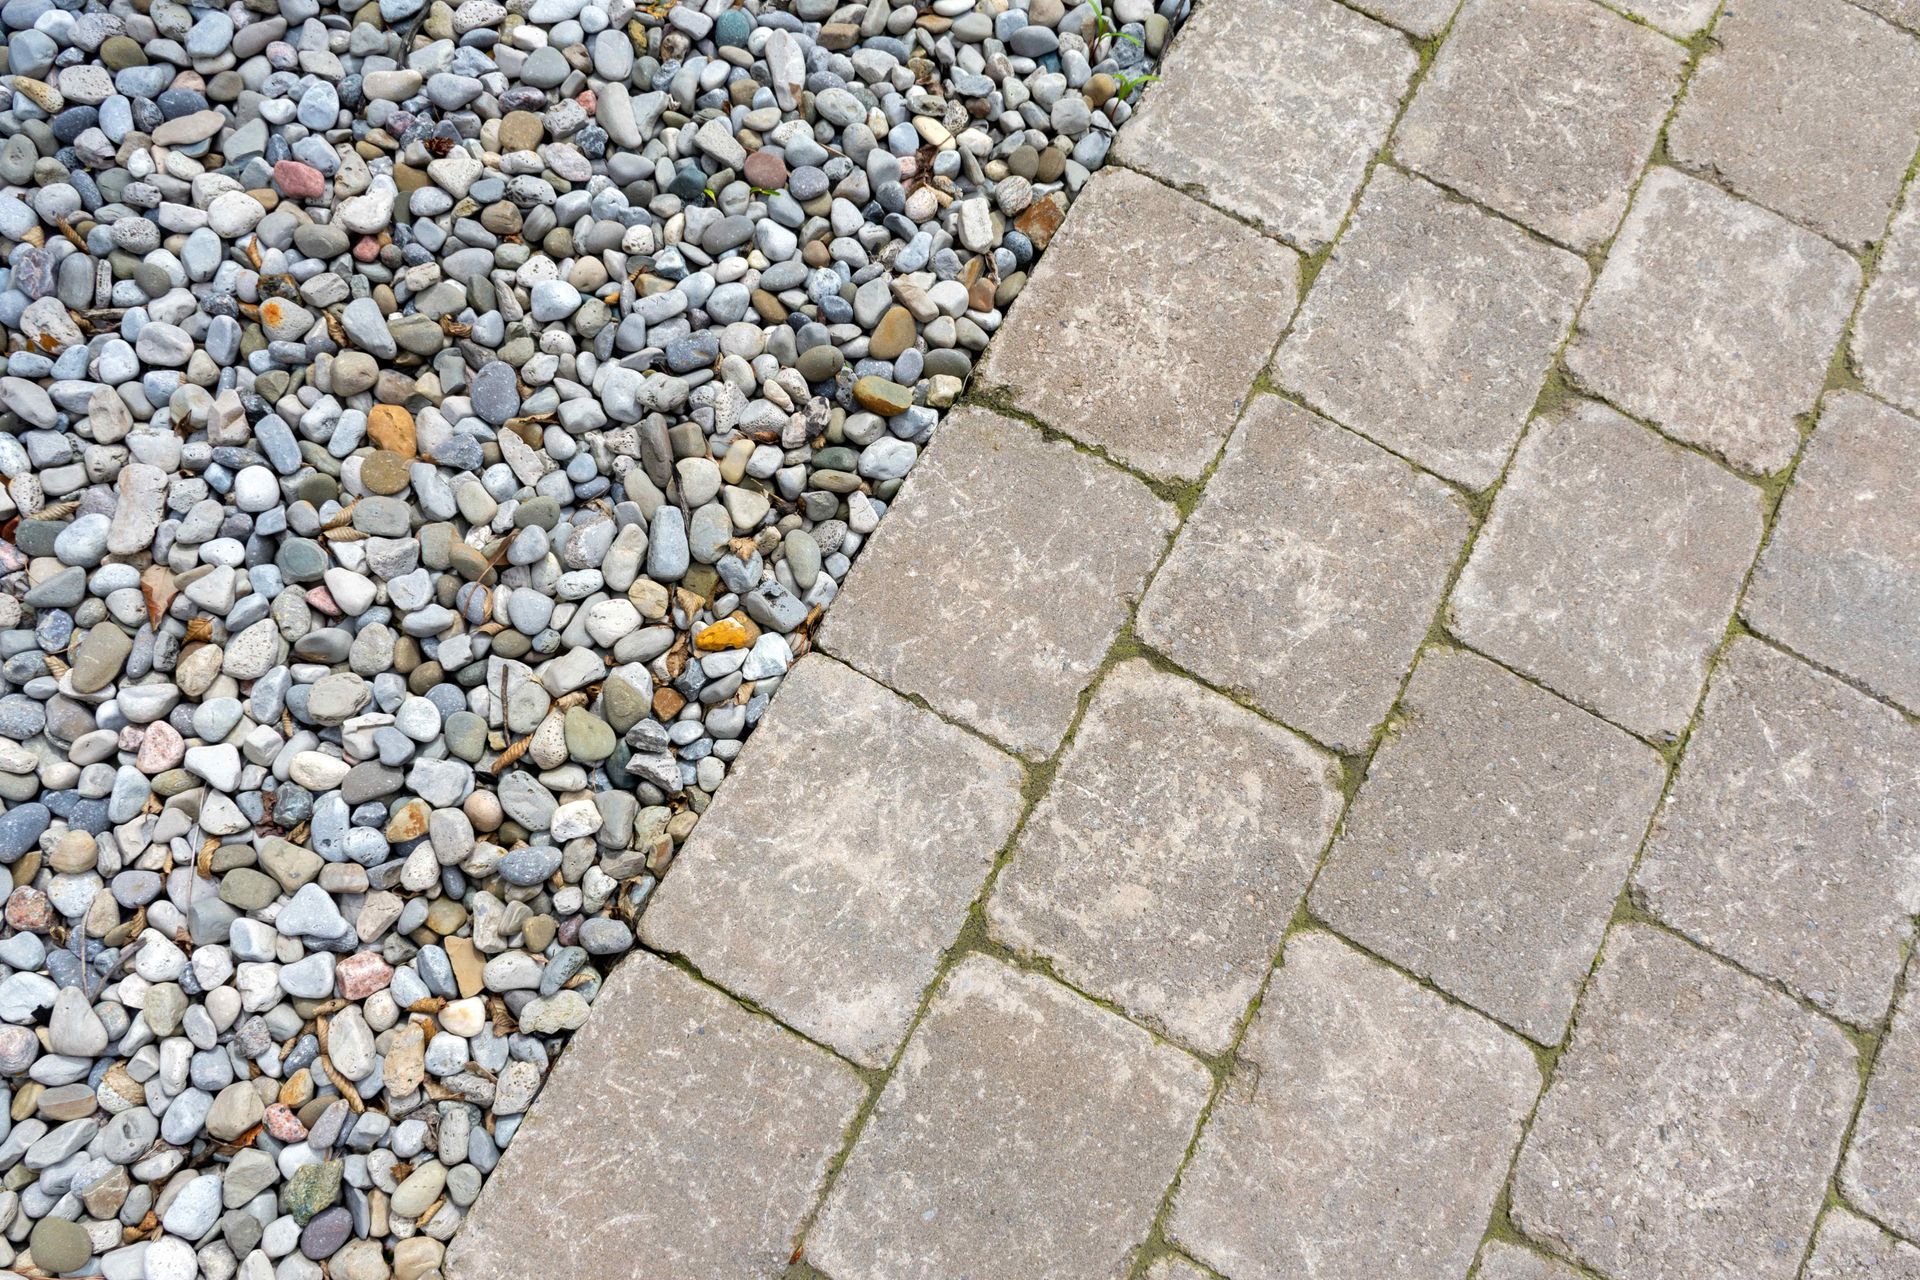 hardscaped paver path next to a riverrock garden bed